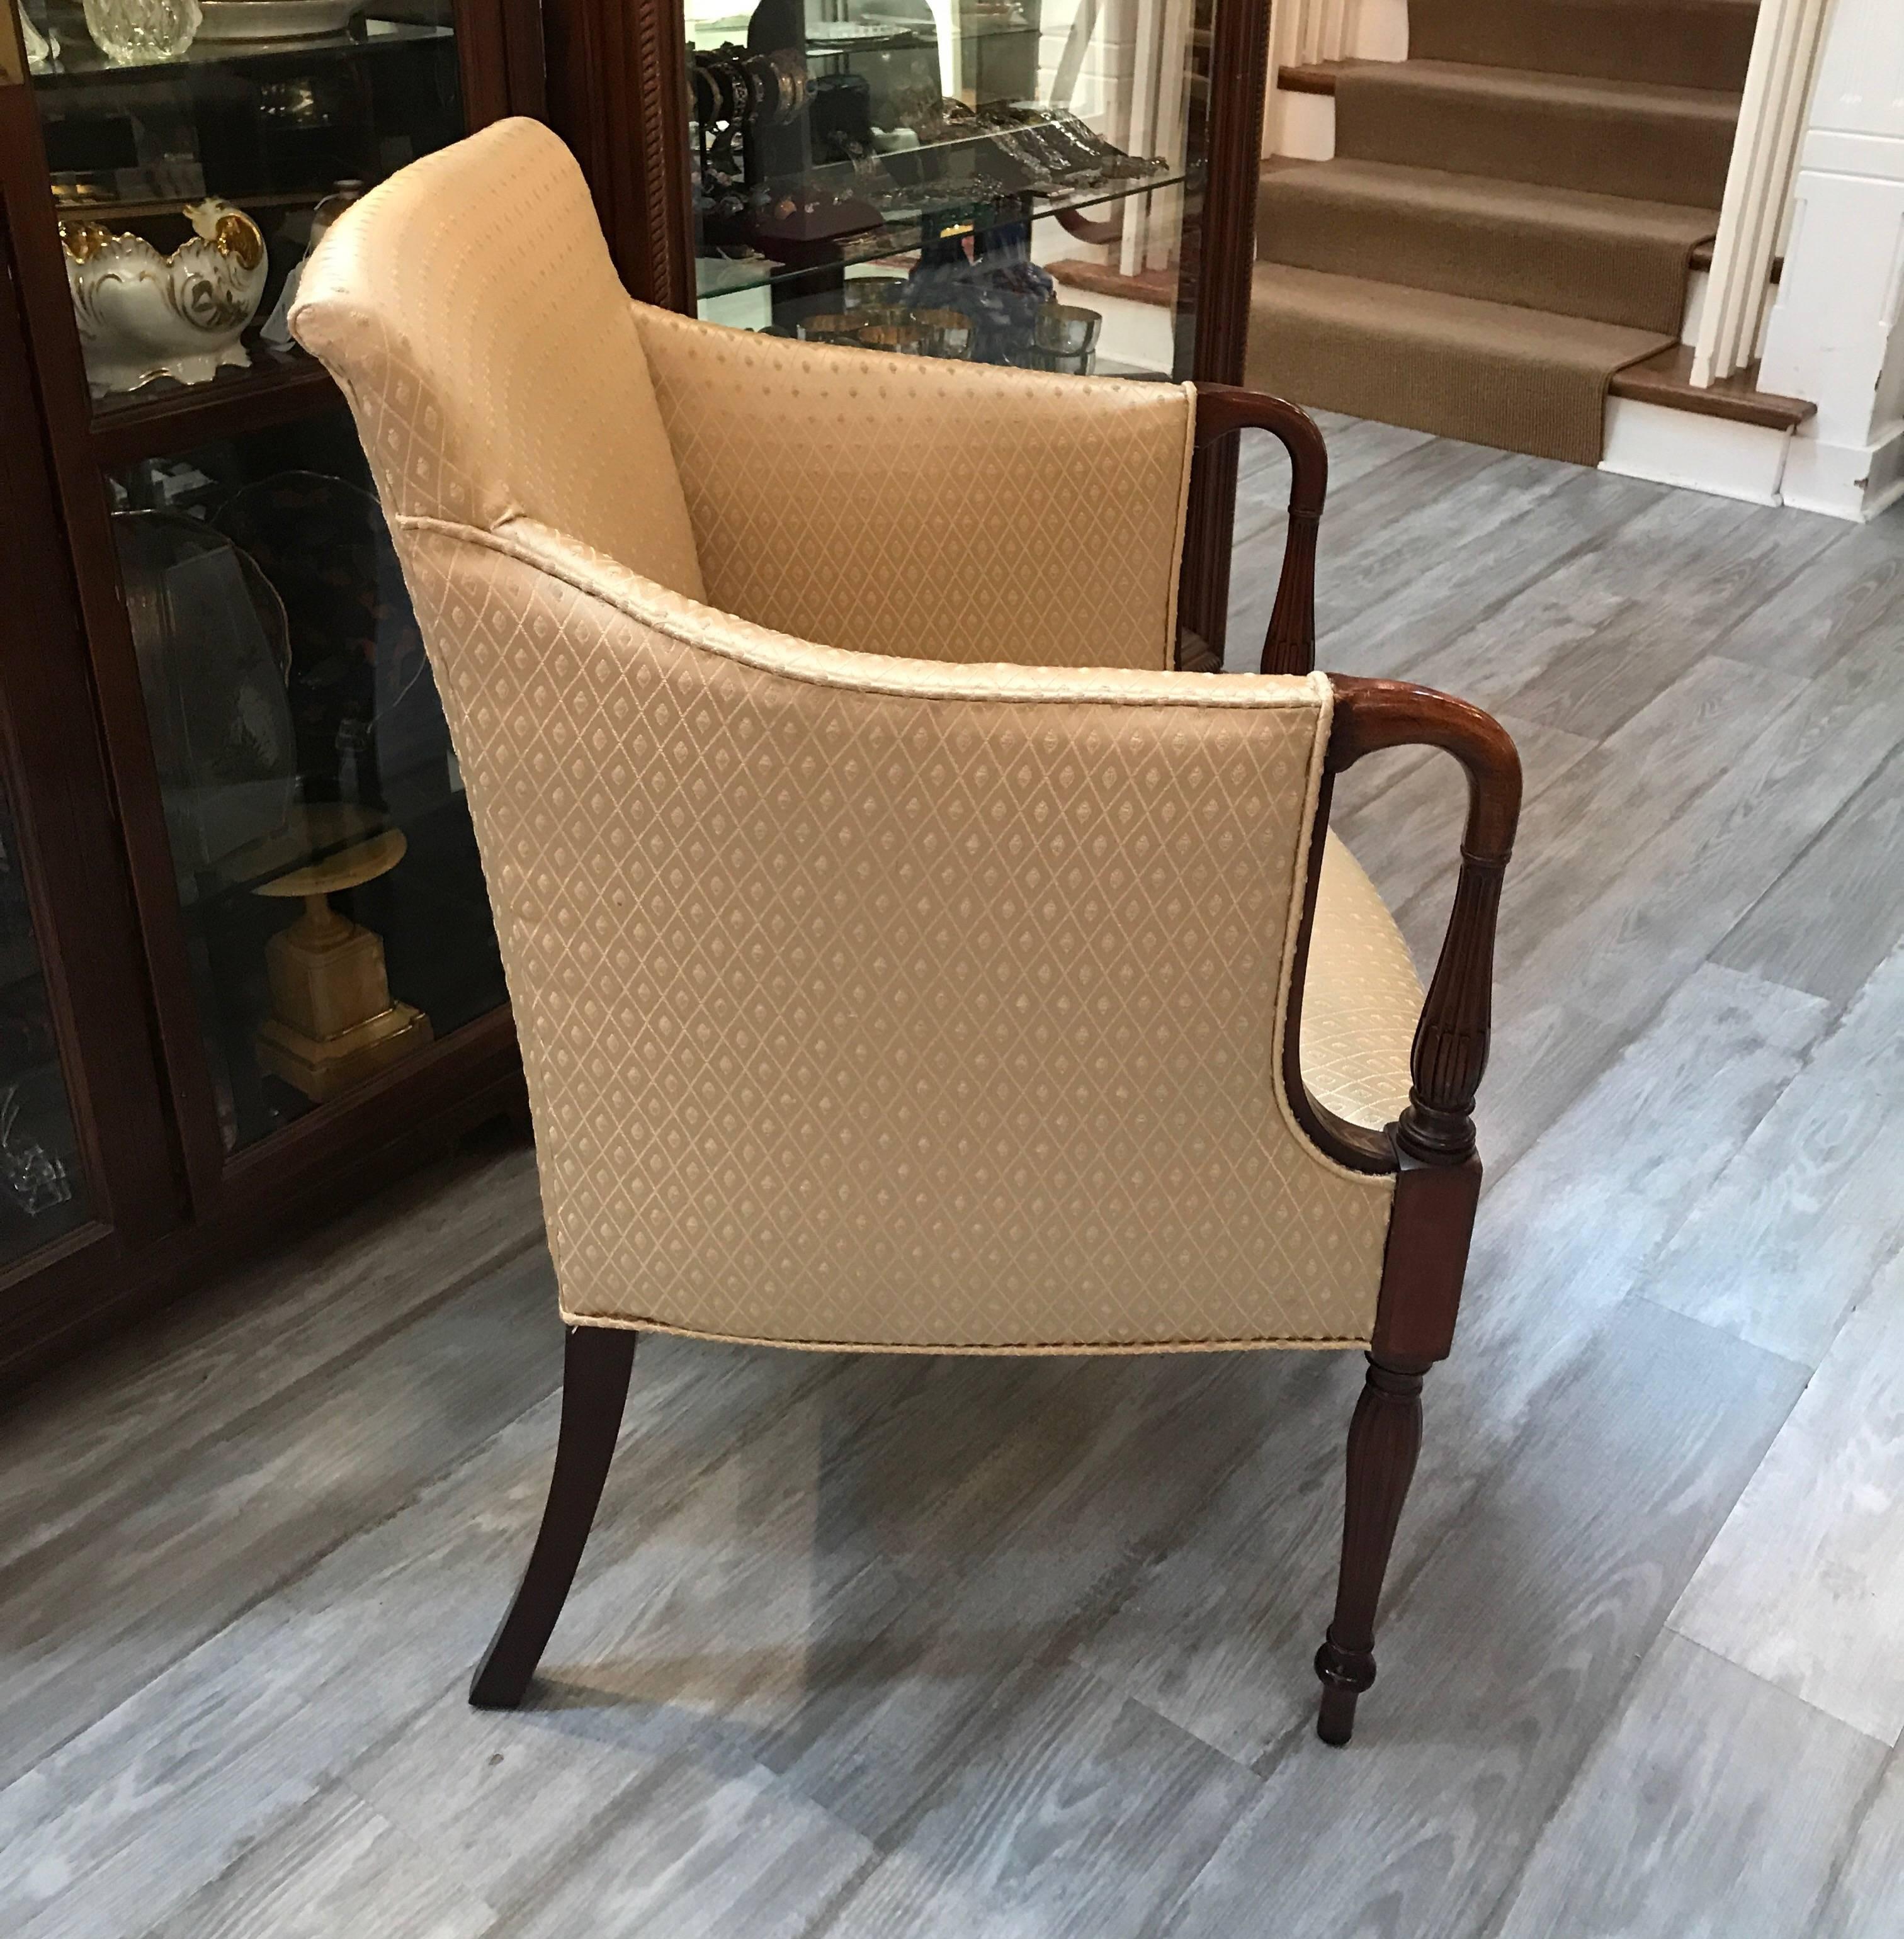 A diminutive Sheraton style mahogany occasional chair with new fabric. The attached back and seat with turned arms, delicate inlay at the arms with turned and reeded legs. Perfect smaller accent chair.